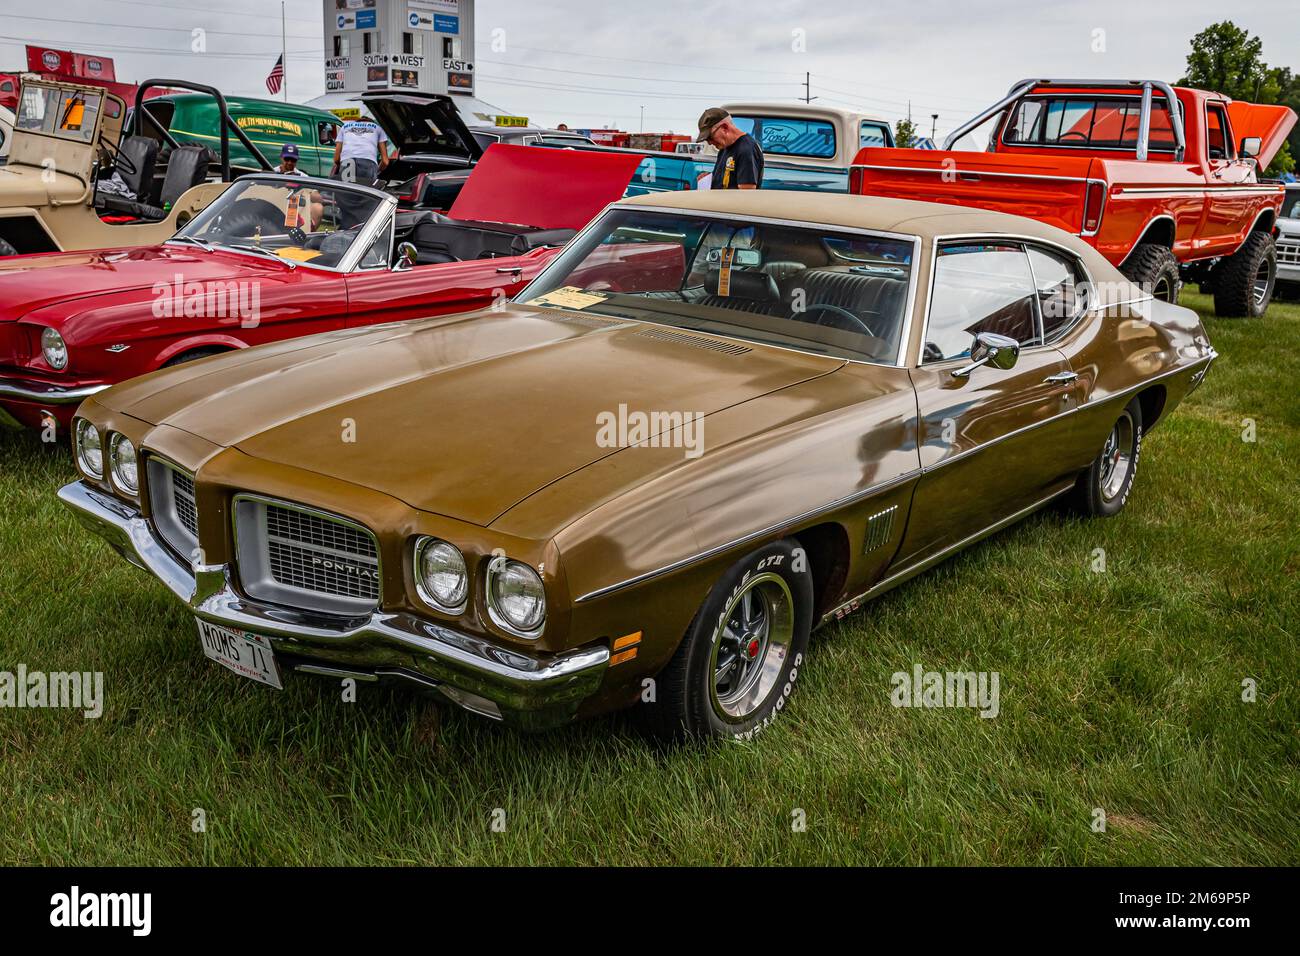 Iola, WI - July 07, 2022: High perspective front corner view of a 1971 Pontiac LeMans 2 Door Hardtop at a local car show. Stock Photo